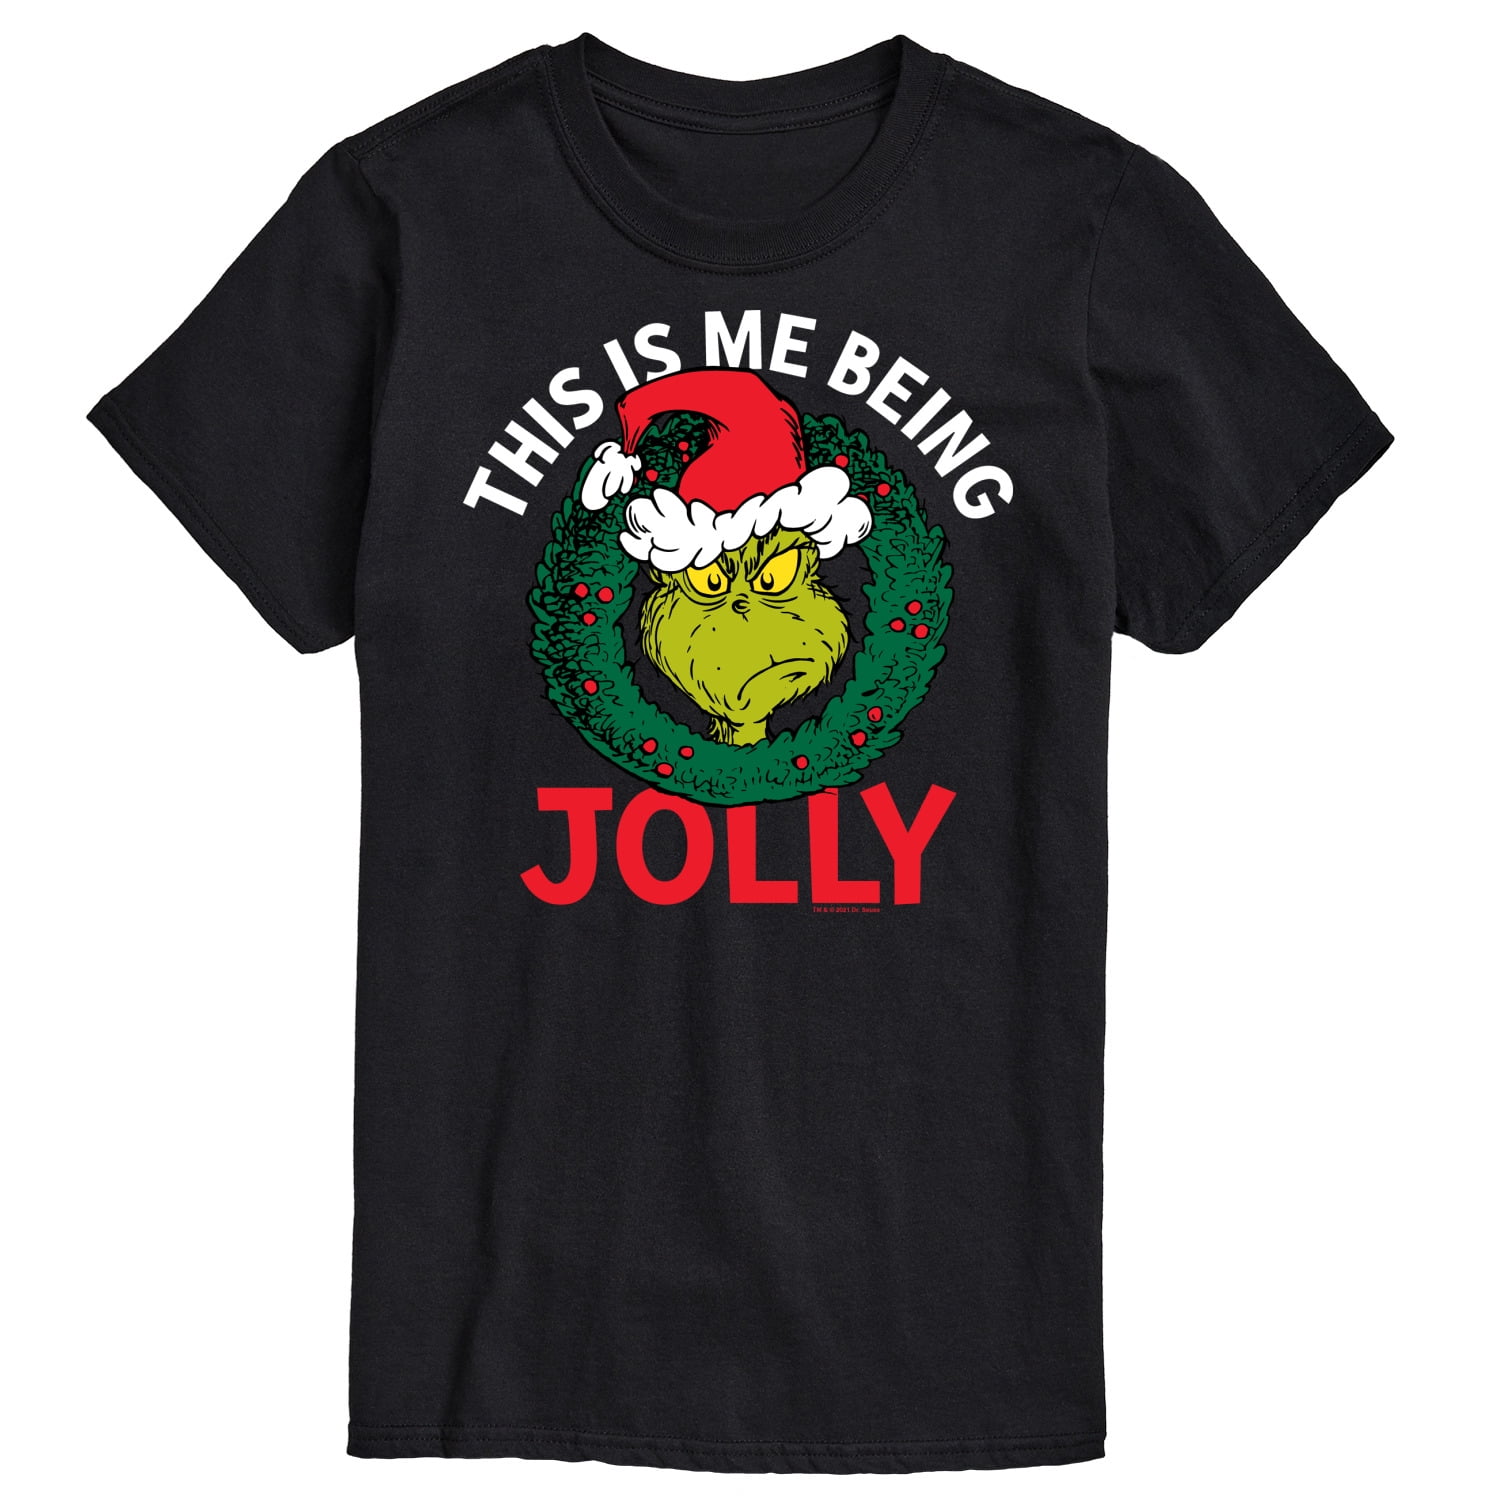 The Grinch - This Is Me Being Jolly - Men's Short Sleeve Graphic T ...